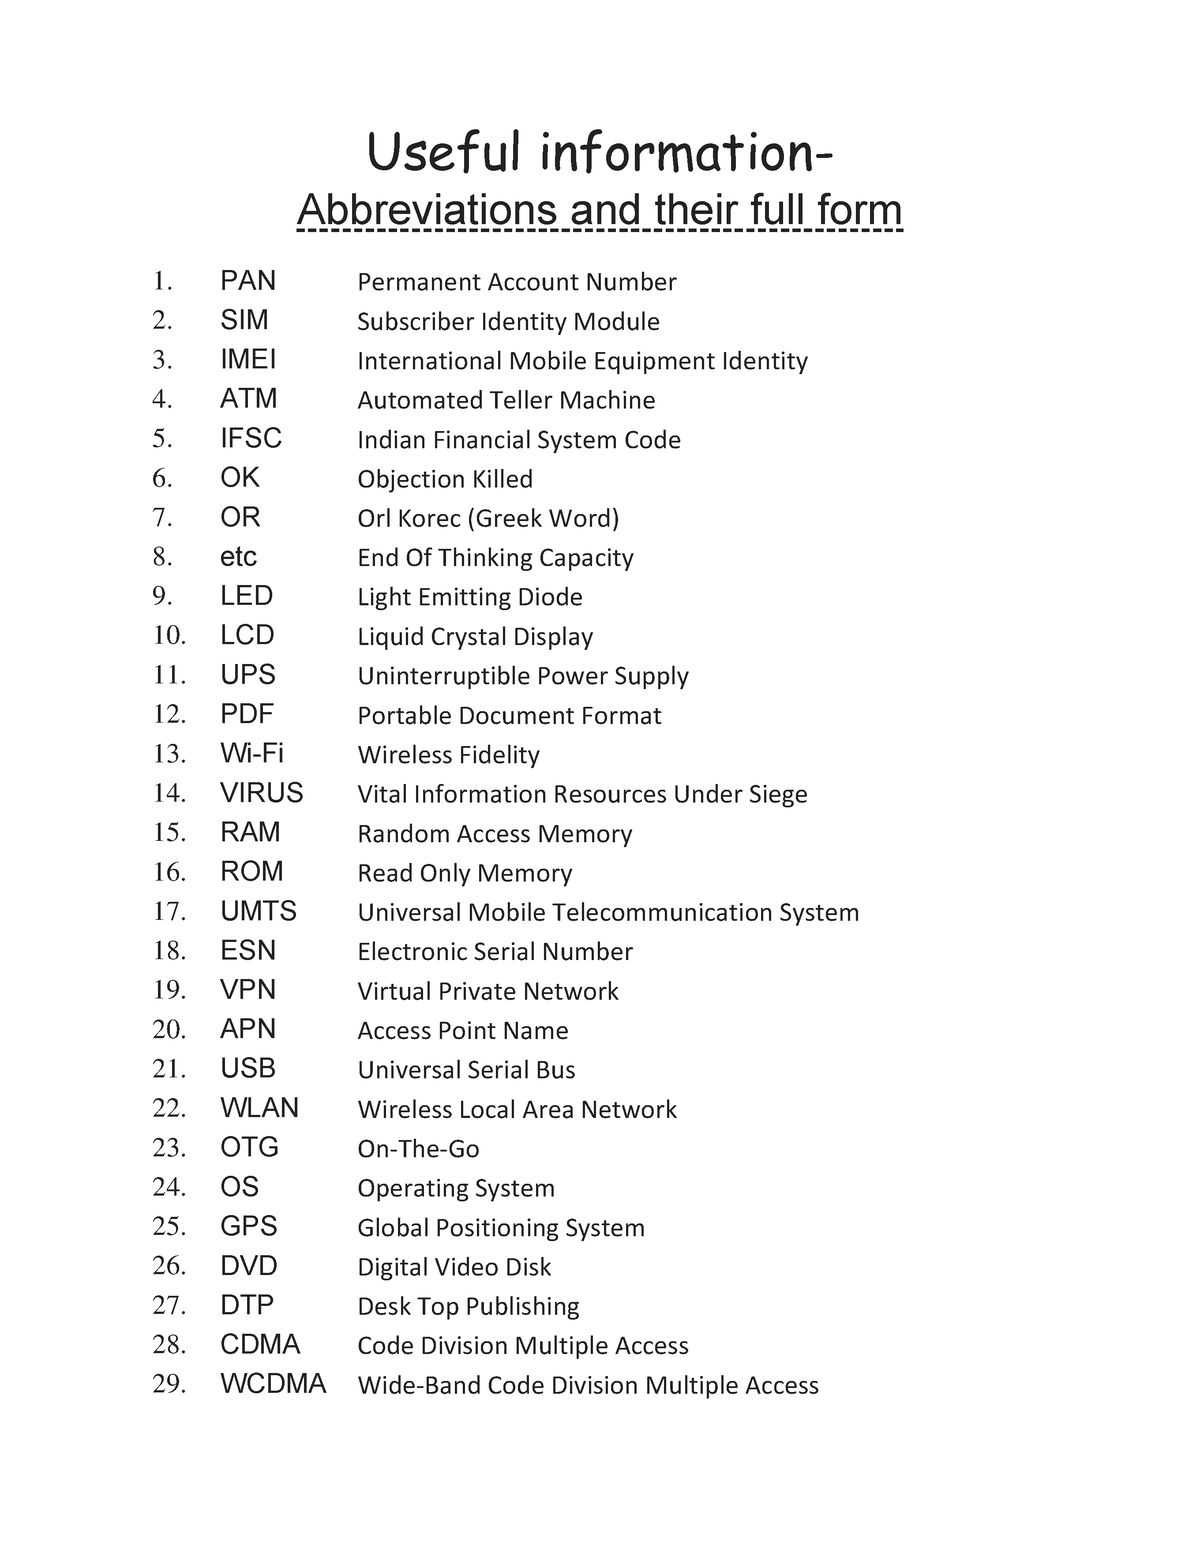 Abbreviations, English short forms, English full forms, Abbreviations and  Acronyms